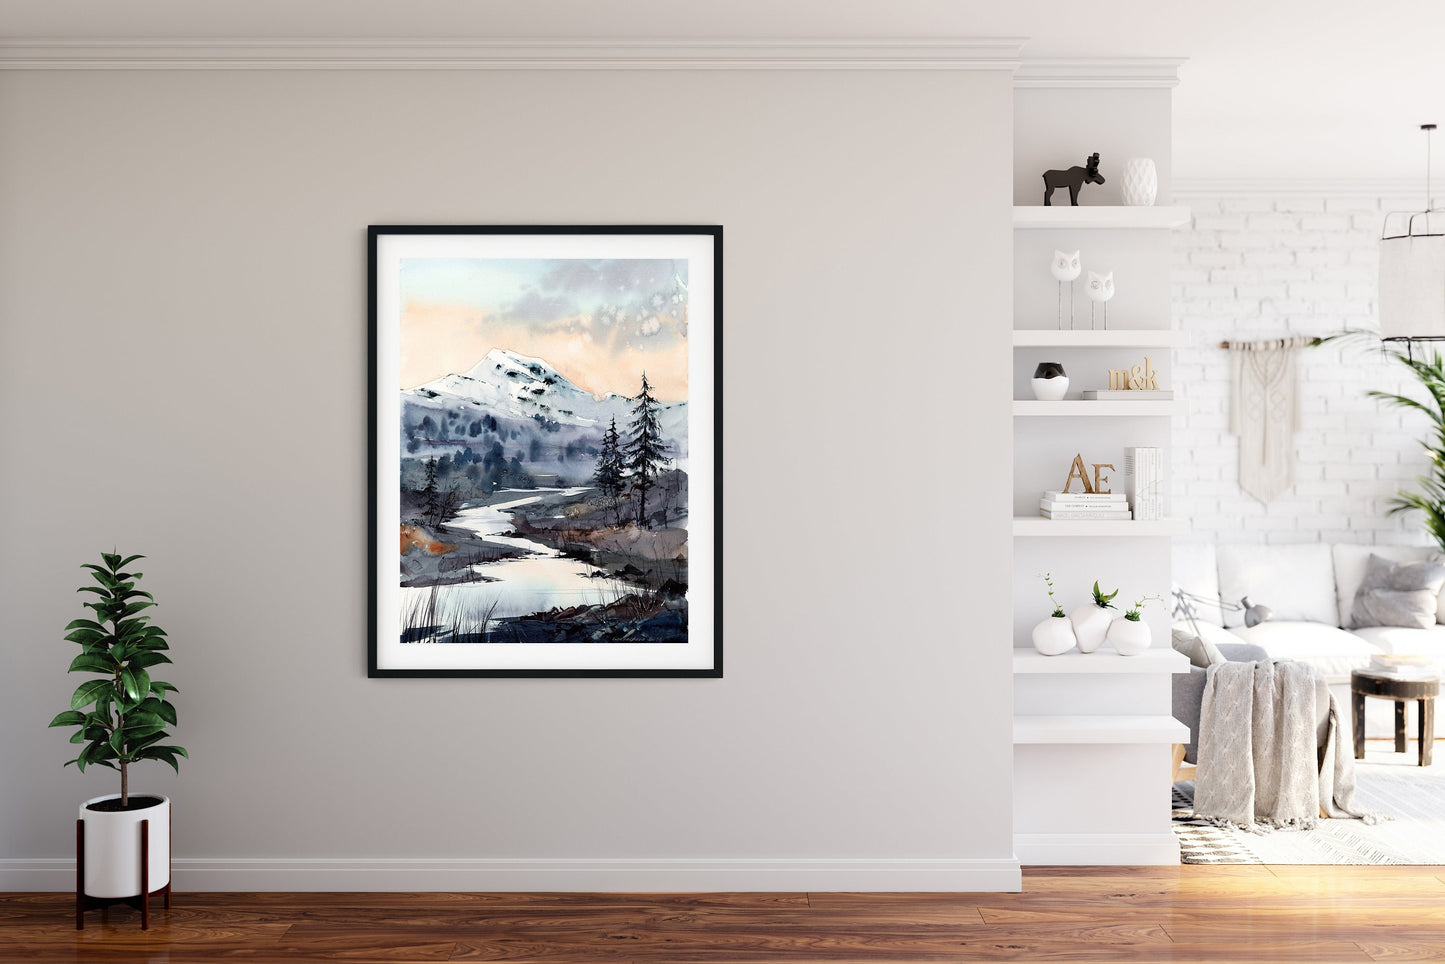 Nature Print, Mountain Wall Decor, Abstract Landscape Painting on Canvas, Contemporary Home Decoration, Fine Art Print